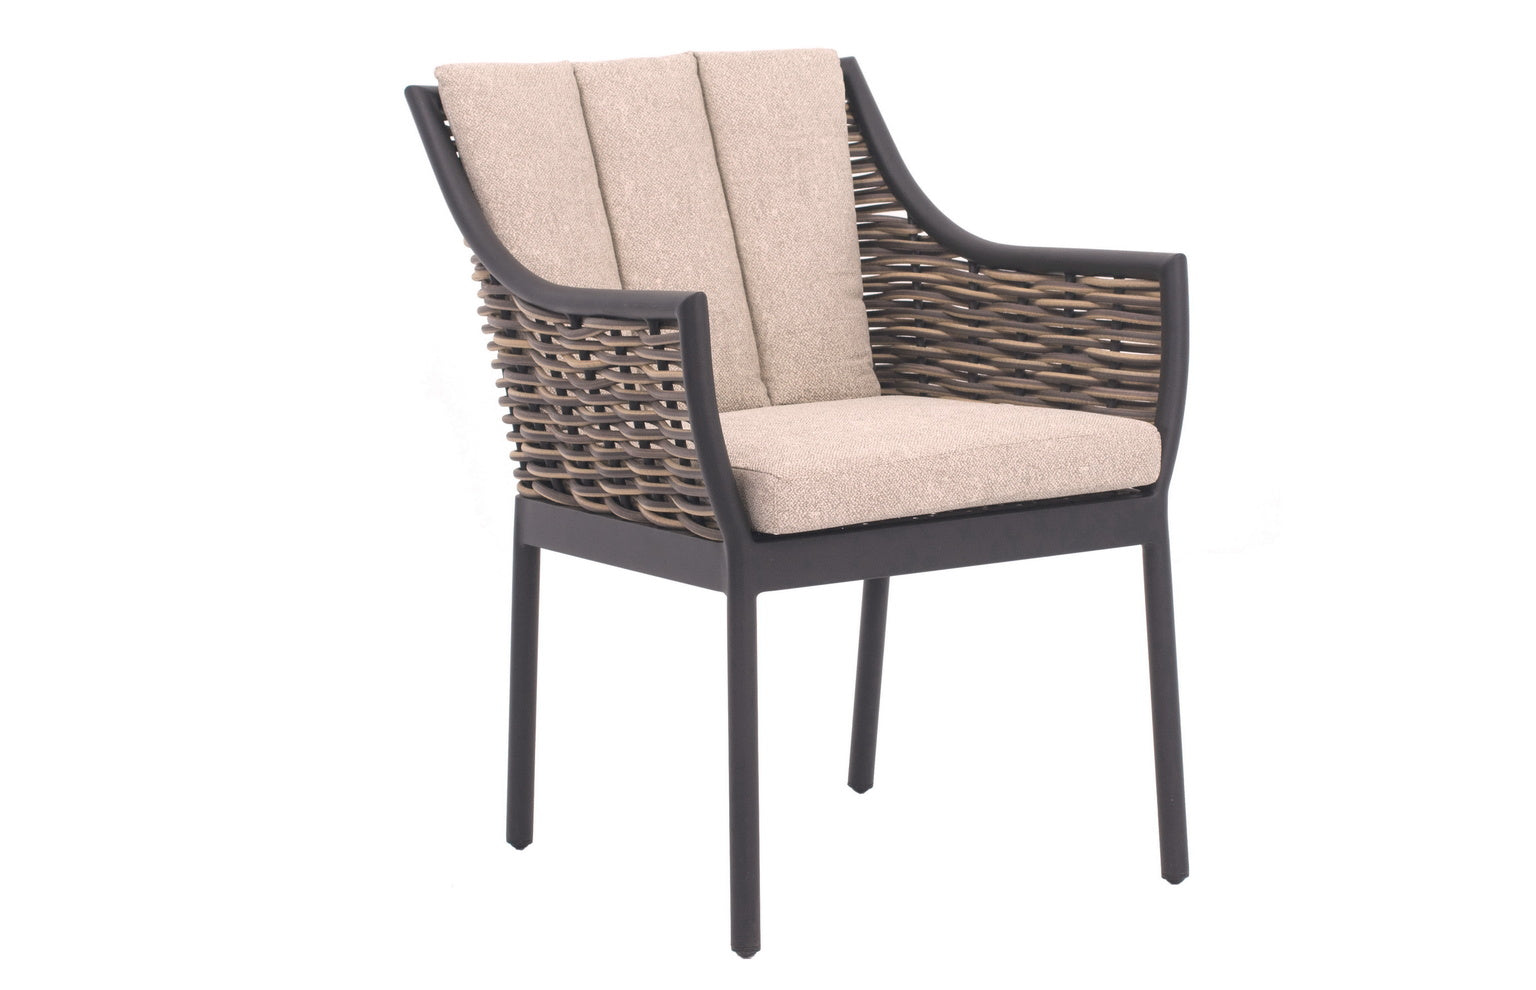 Alfresco Home Milou Wicker Dining Arm Chair With Cushions